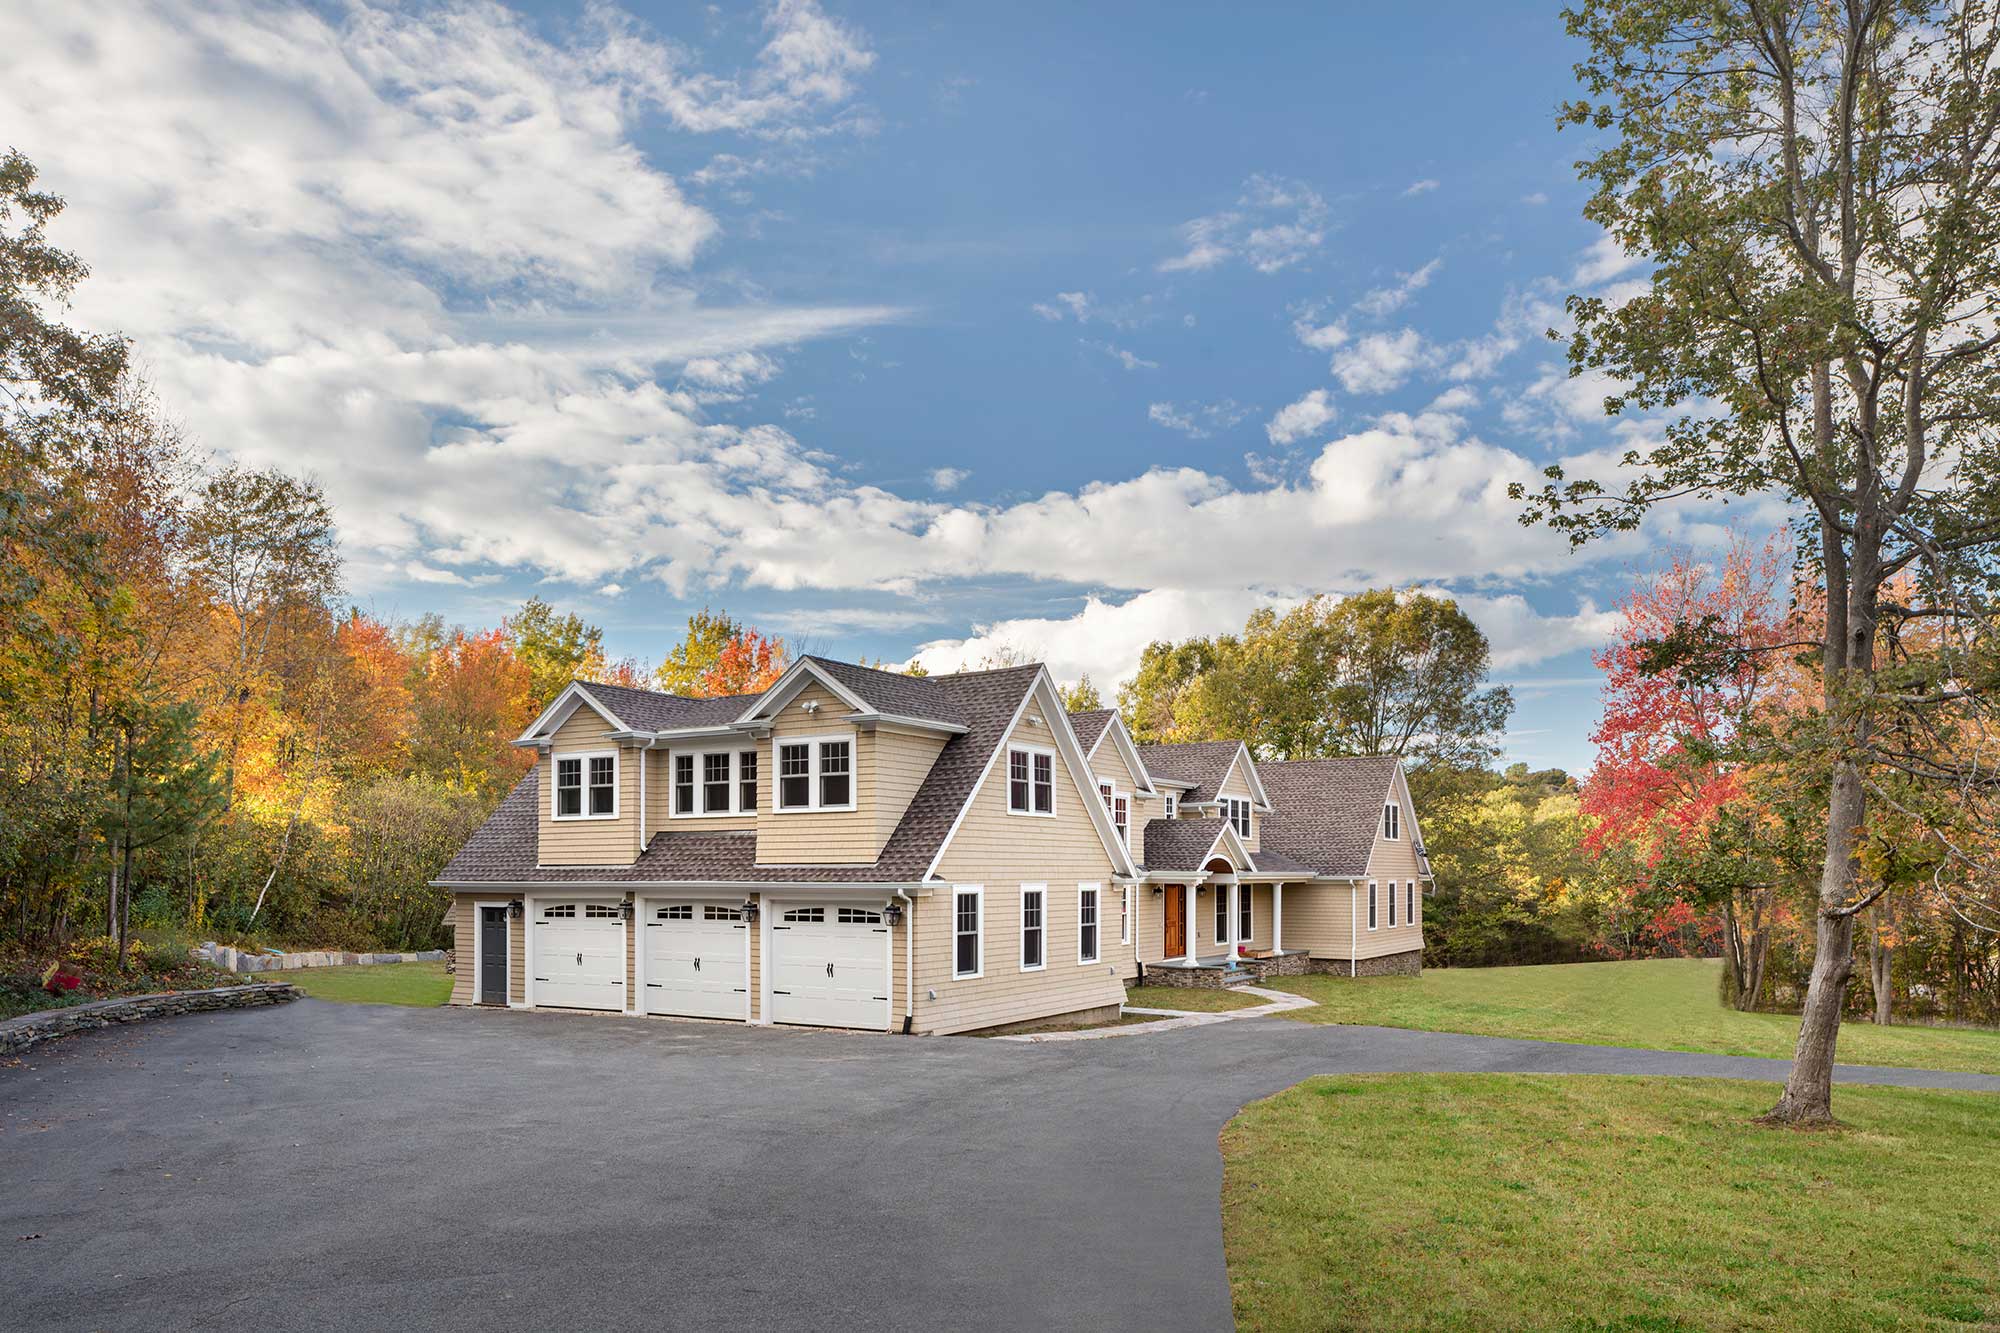 Large two-story beige house with 3-car garage